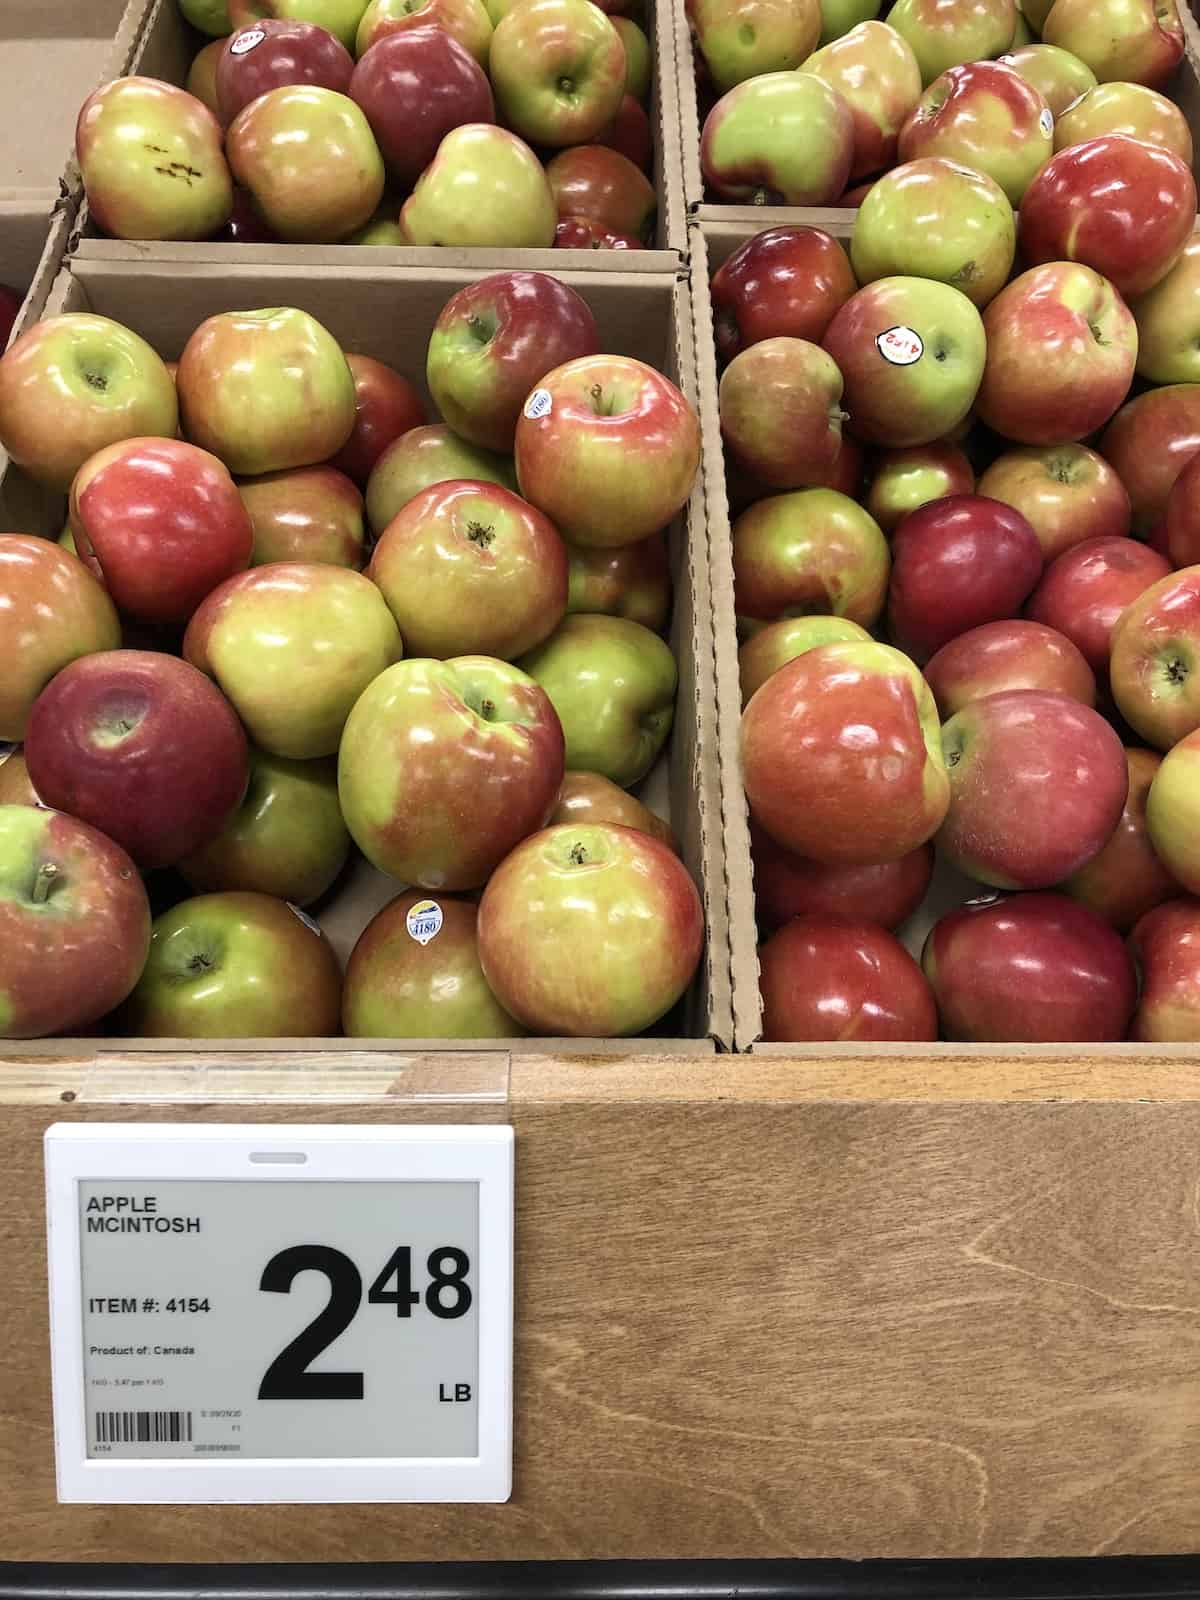 Mcintosh apples in the grocery store